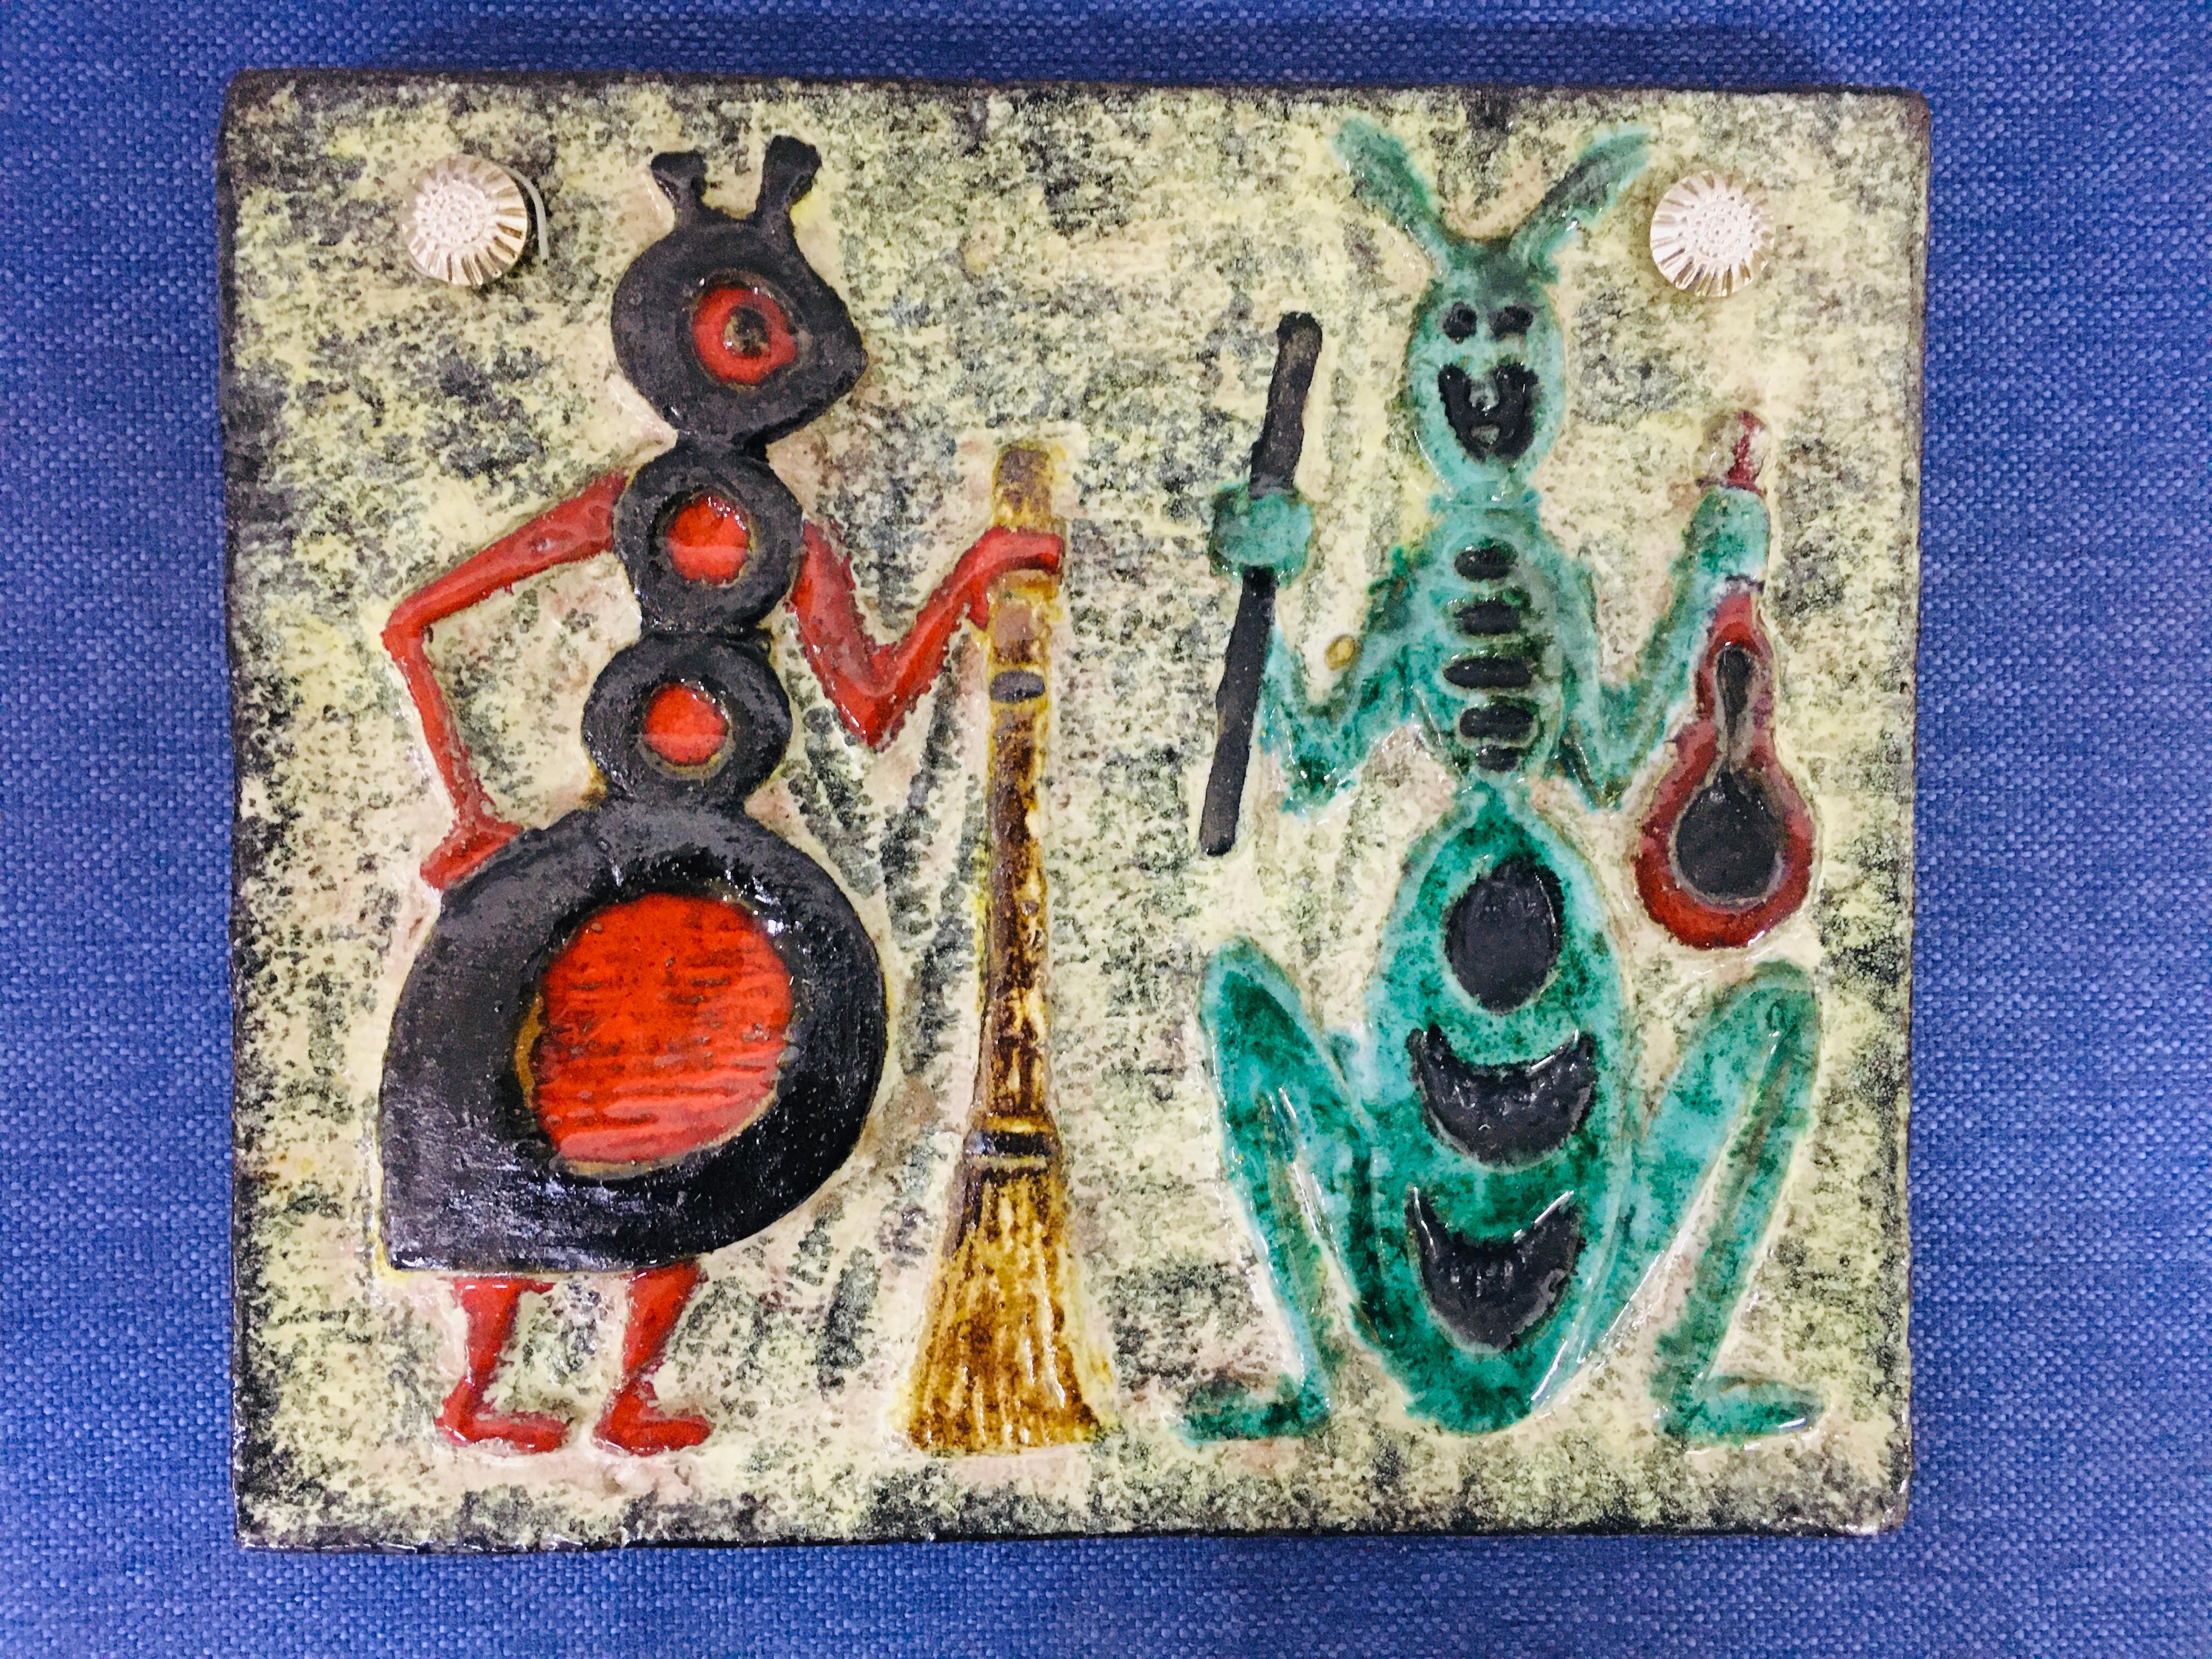 Ceramic artwork by Borsódy Ágnes, depicting the charachters of 